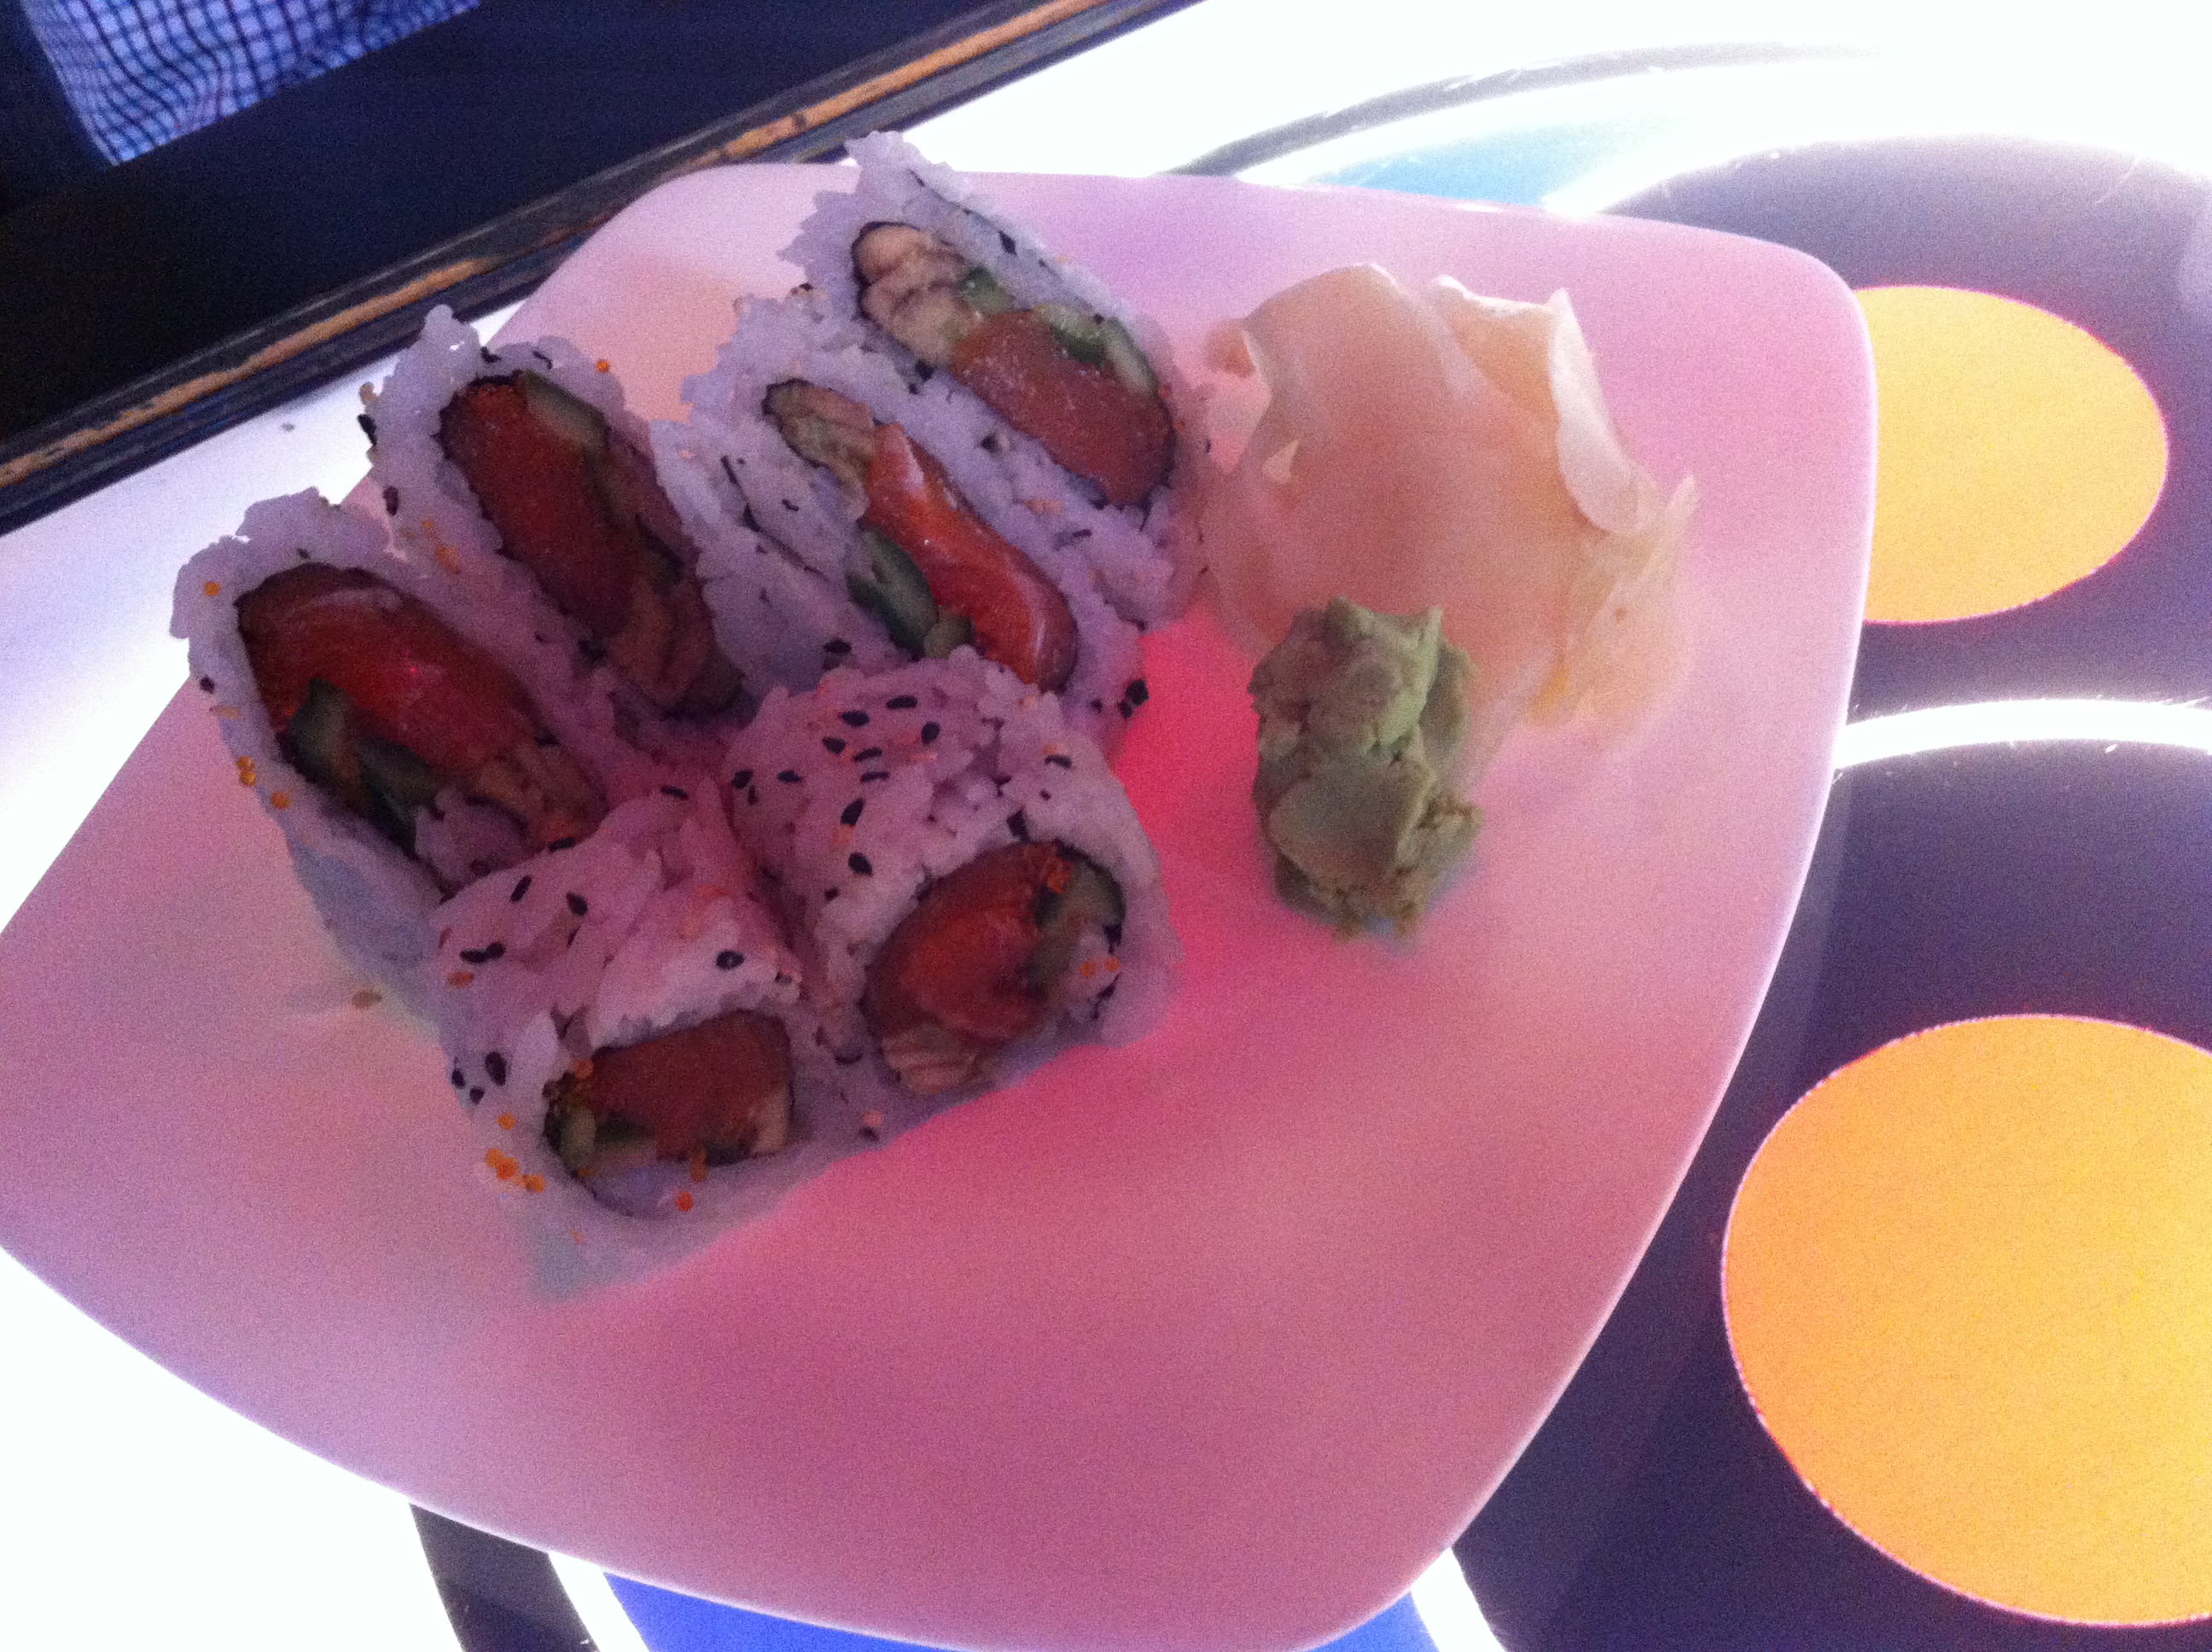 The Seattle roll at Red Fin Sushi